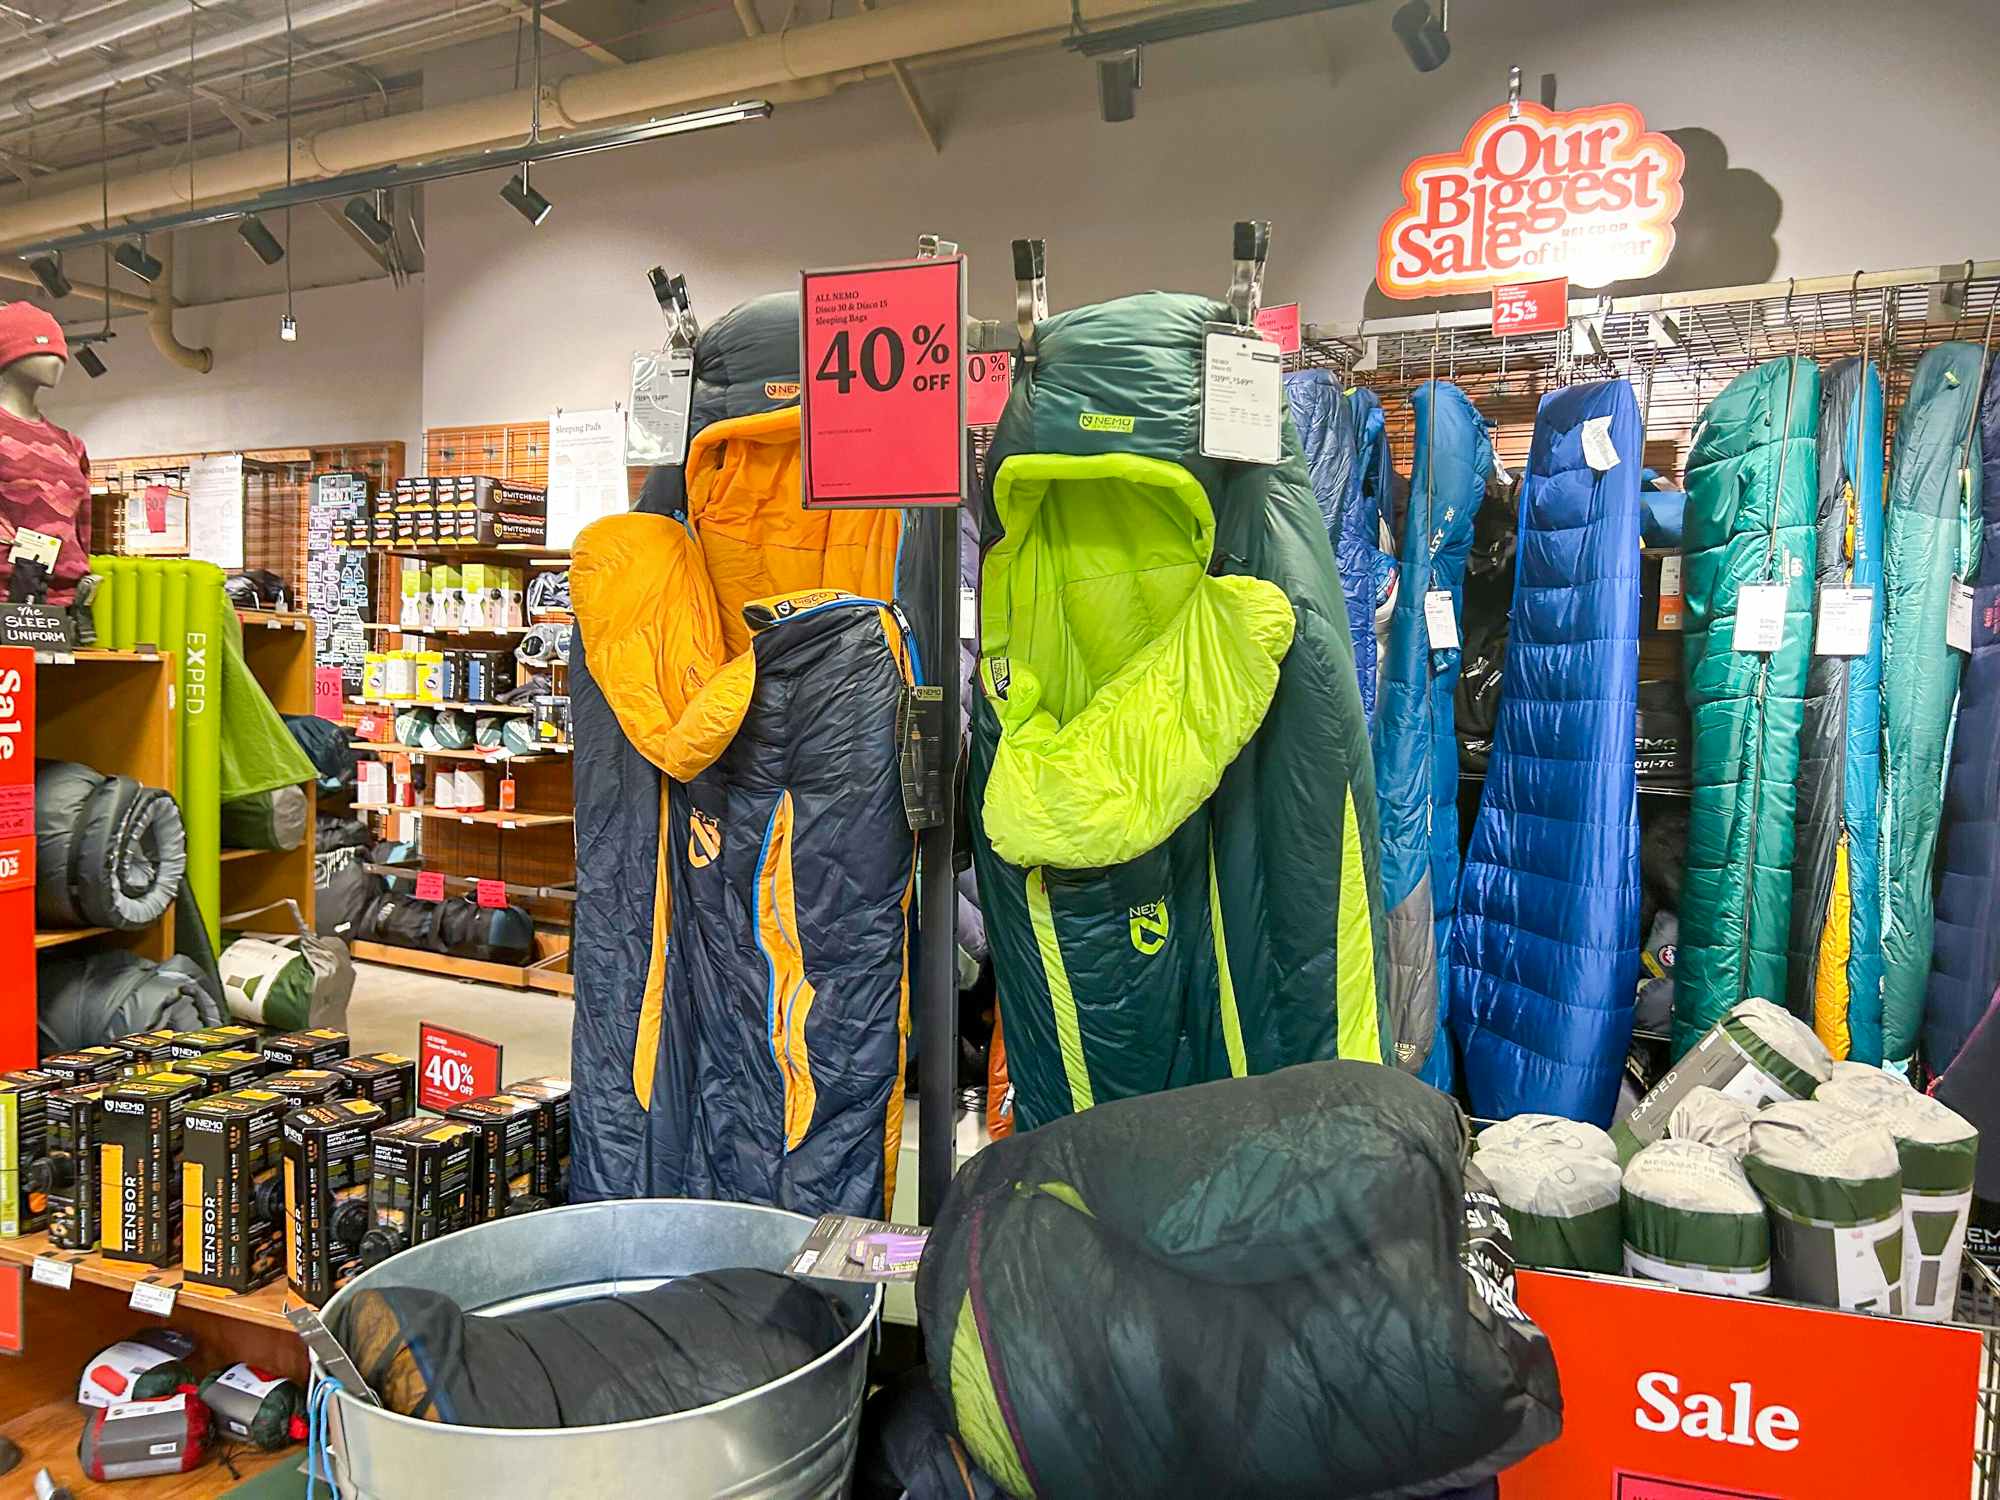 Camping equipment and sleeping bags on sale at REI